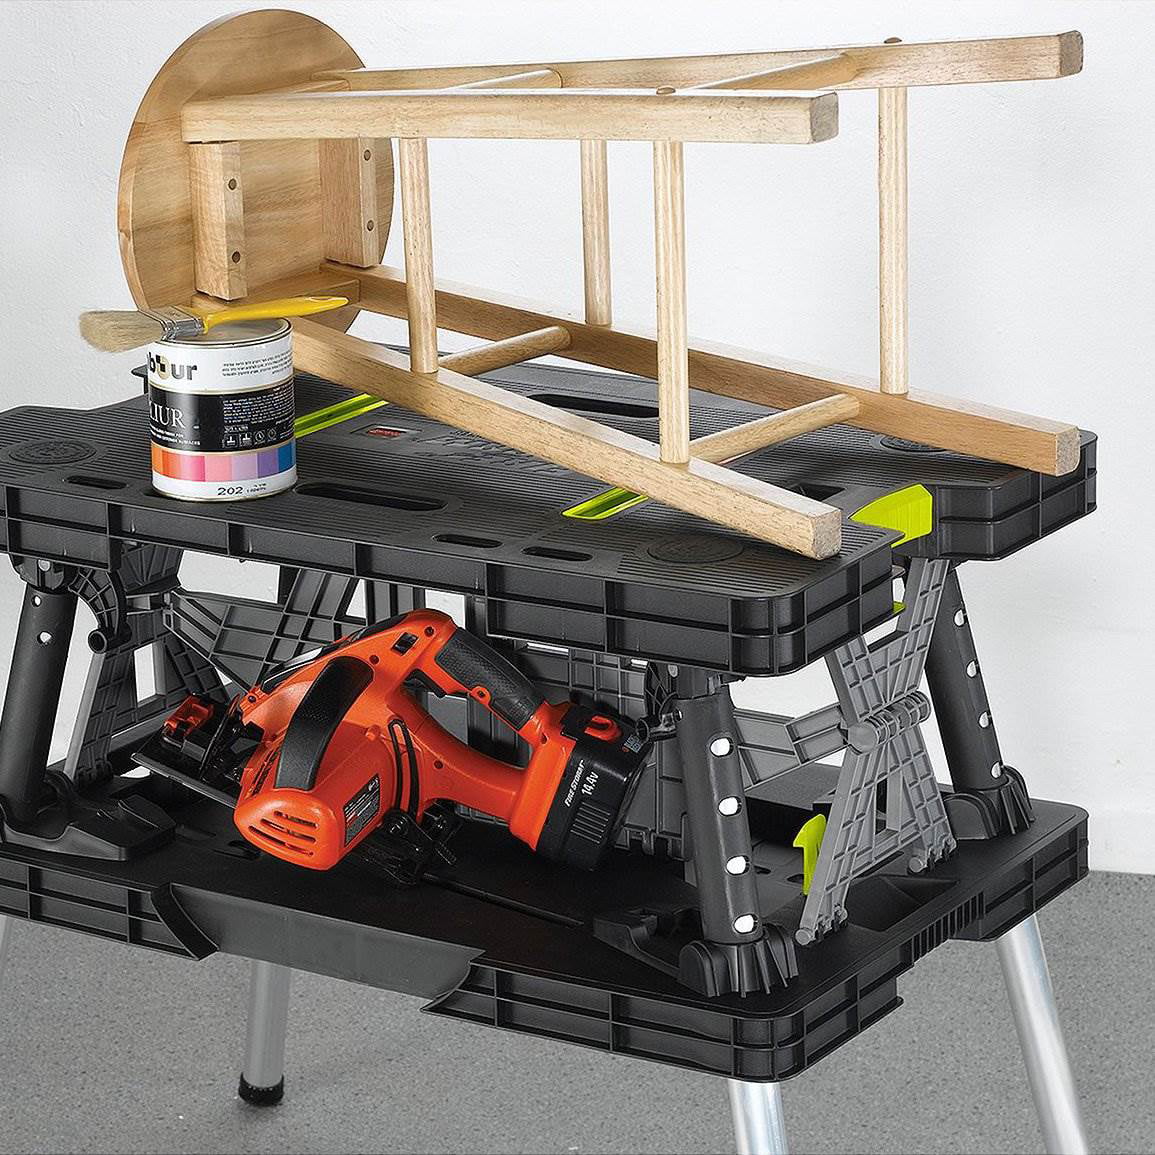 Keter Portable Folding Work Table Workbench Mini Clamps Storage Home Garage NEW 